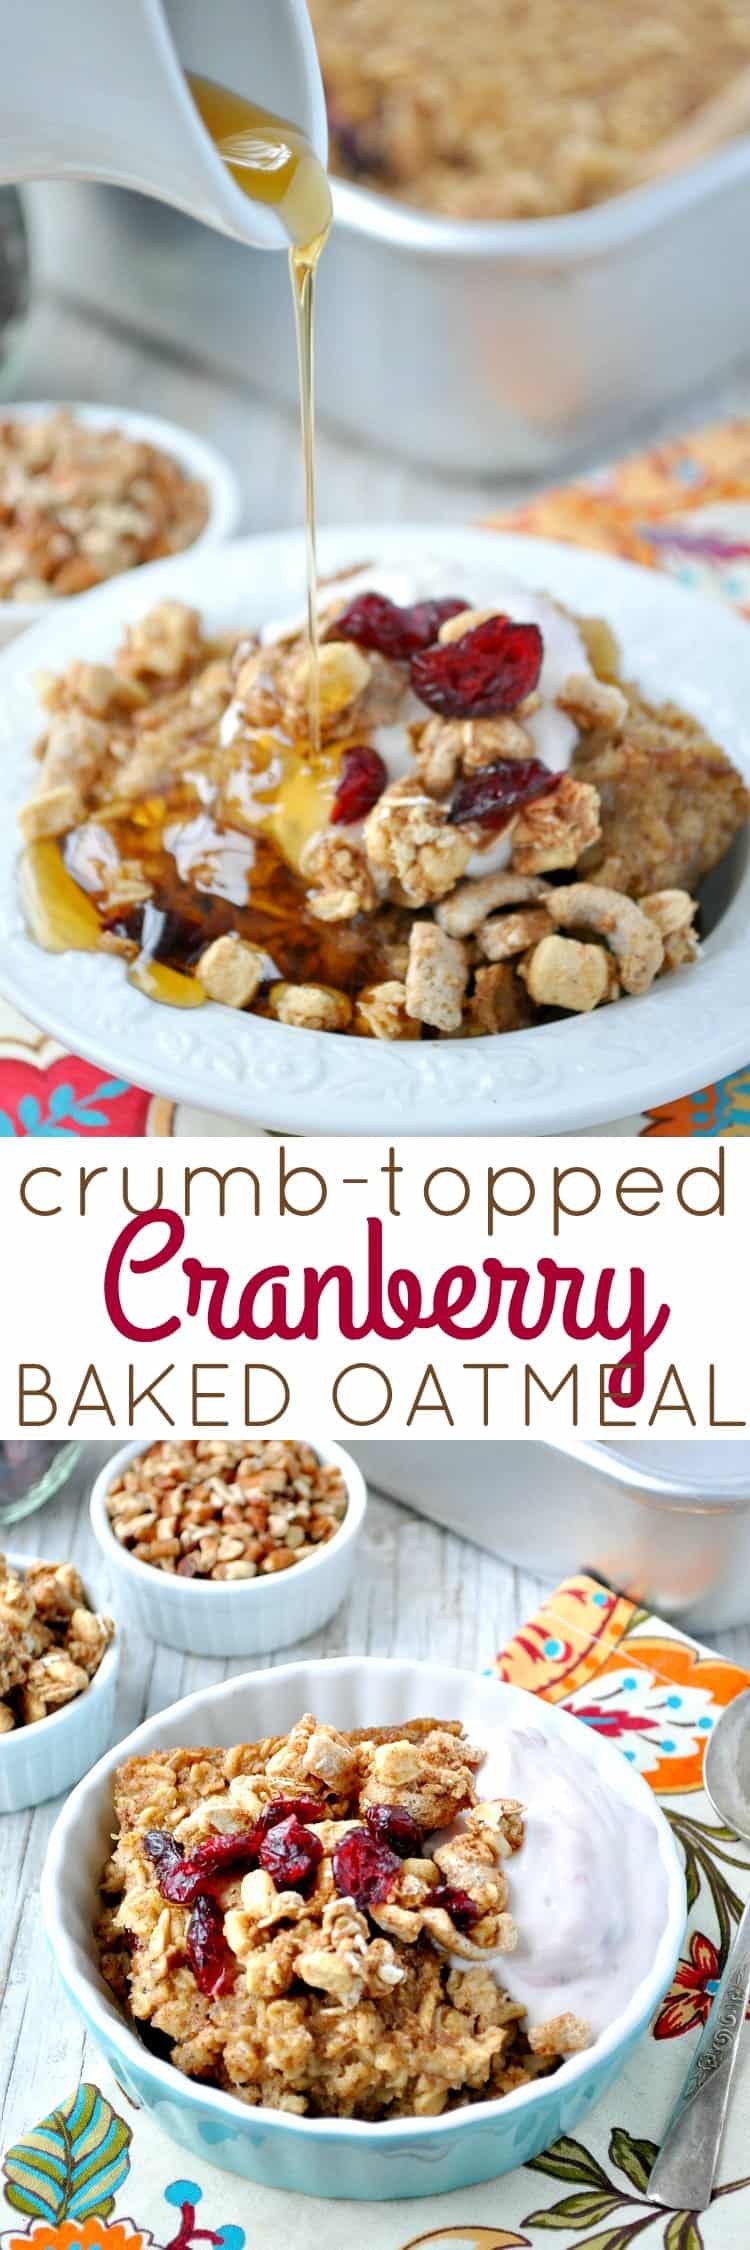 Crumb-Topped Cranberry Baked Oatmeal is an easy and healthy make-ahead breakfast option or a special weekend brunch!